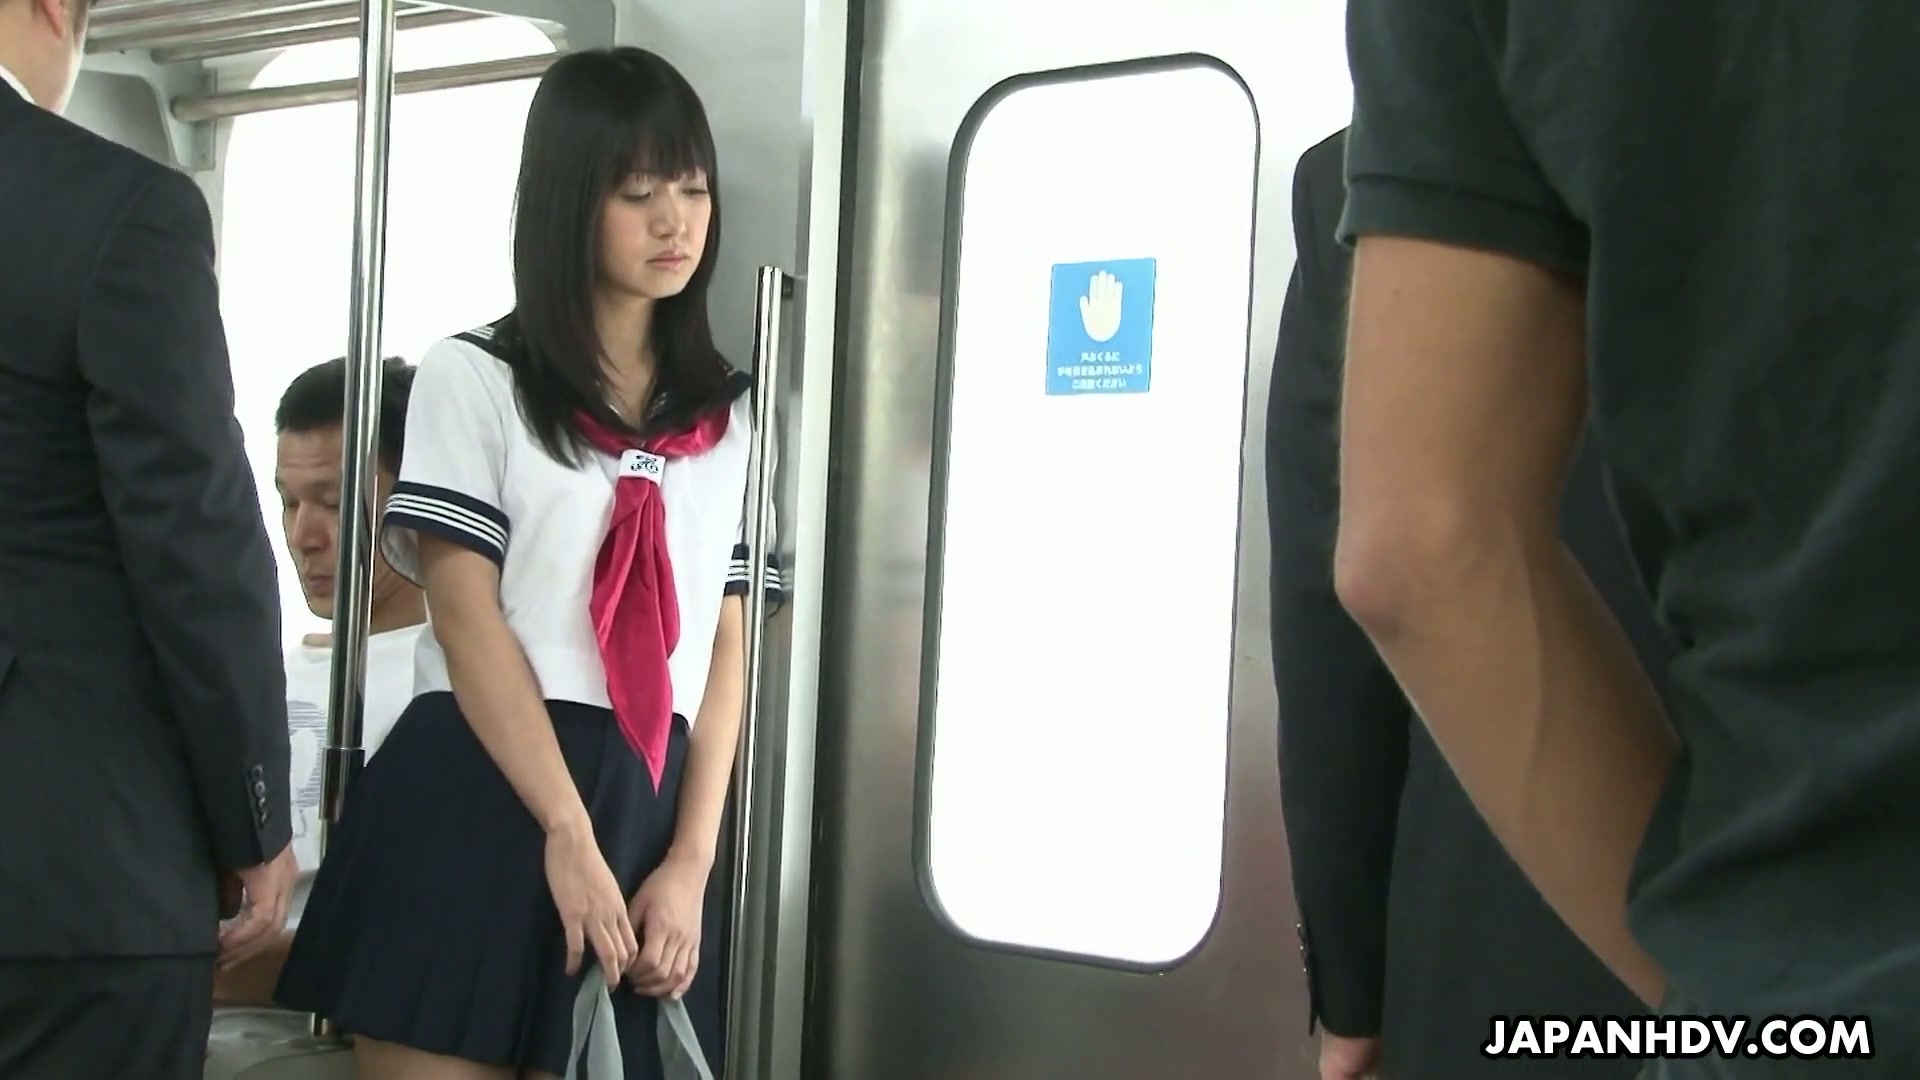 Jap college girl Yayoi Yoshino gets finger fucked by strangers in subway.